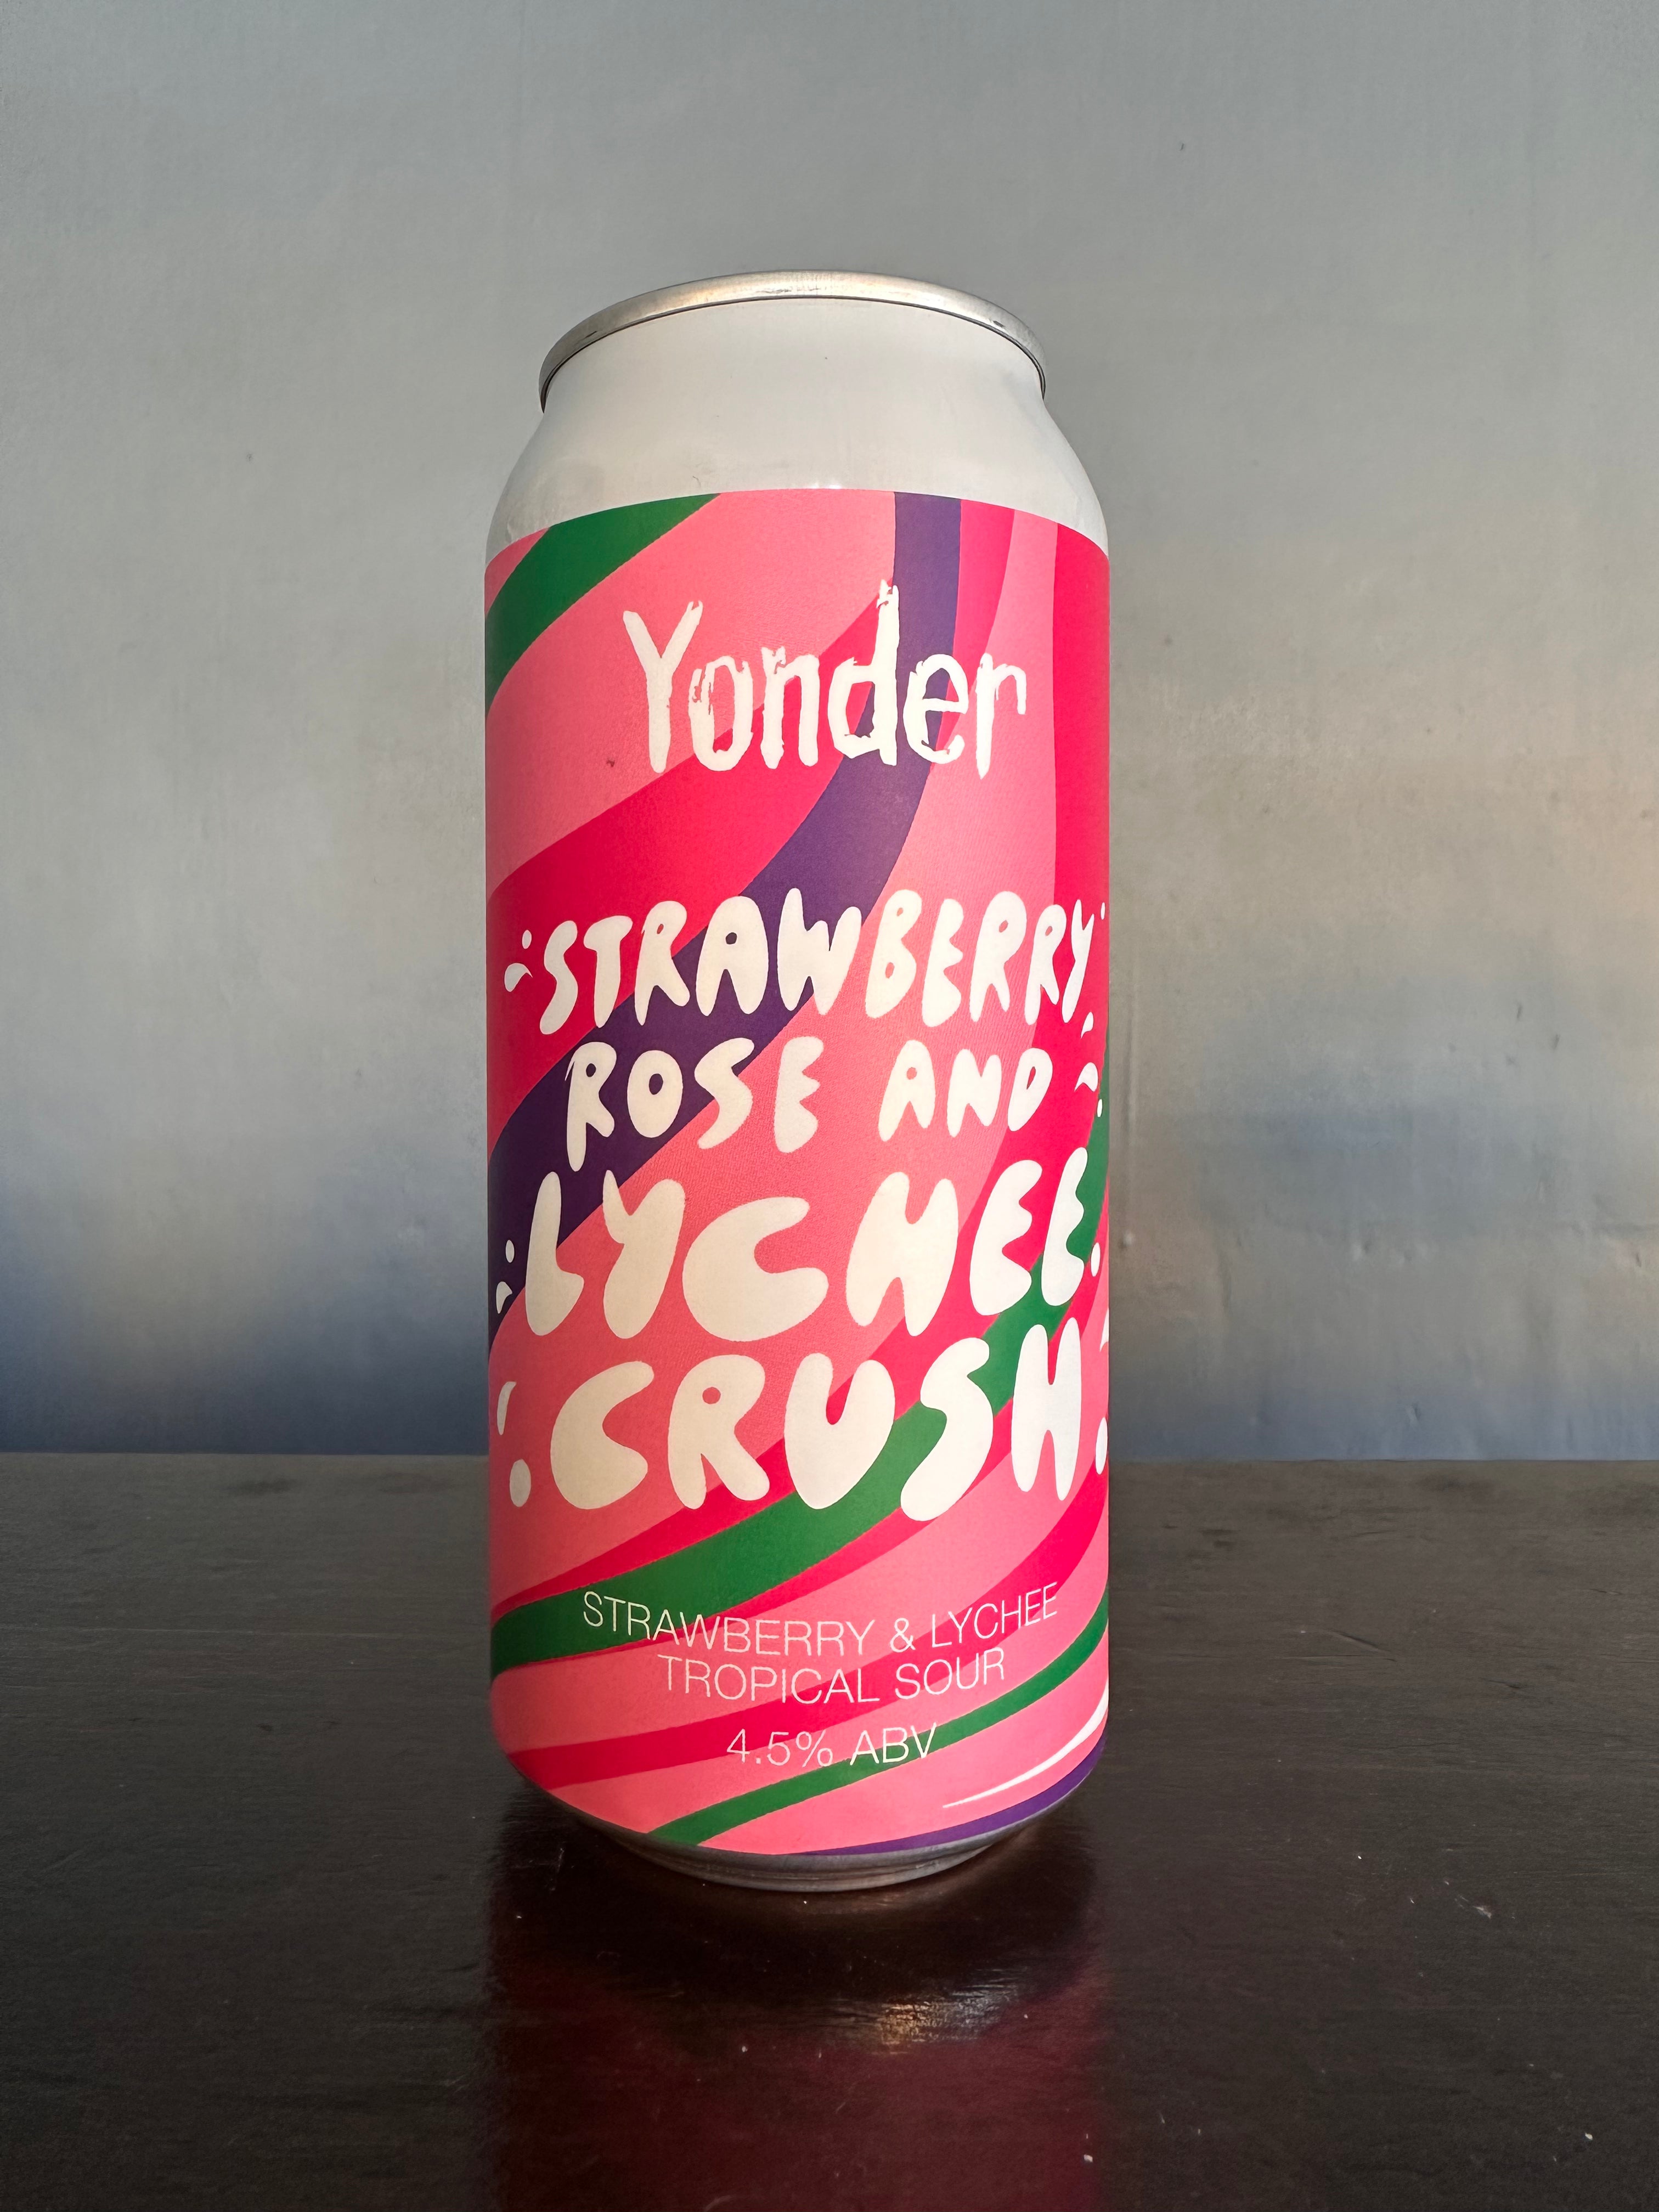 Yonder Strawberry, Rose and Lychee Crush 4.5%